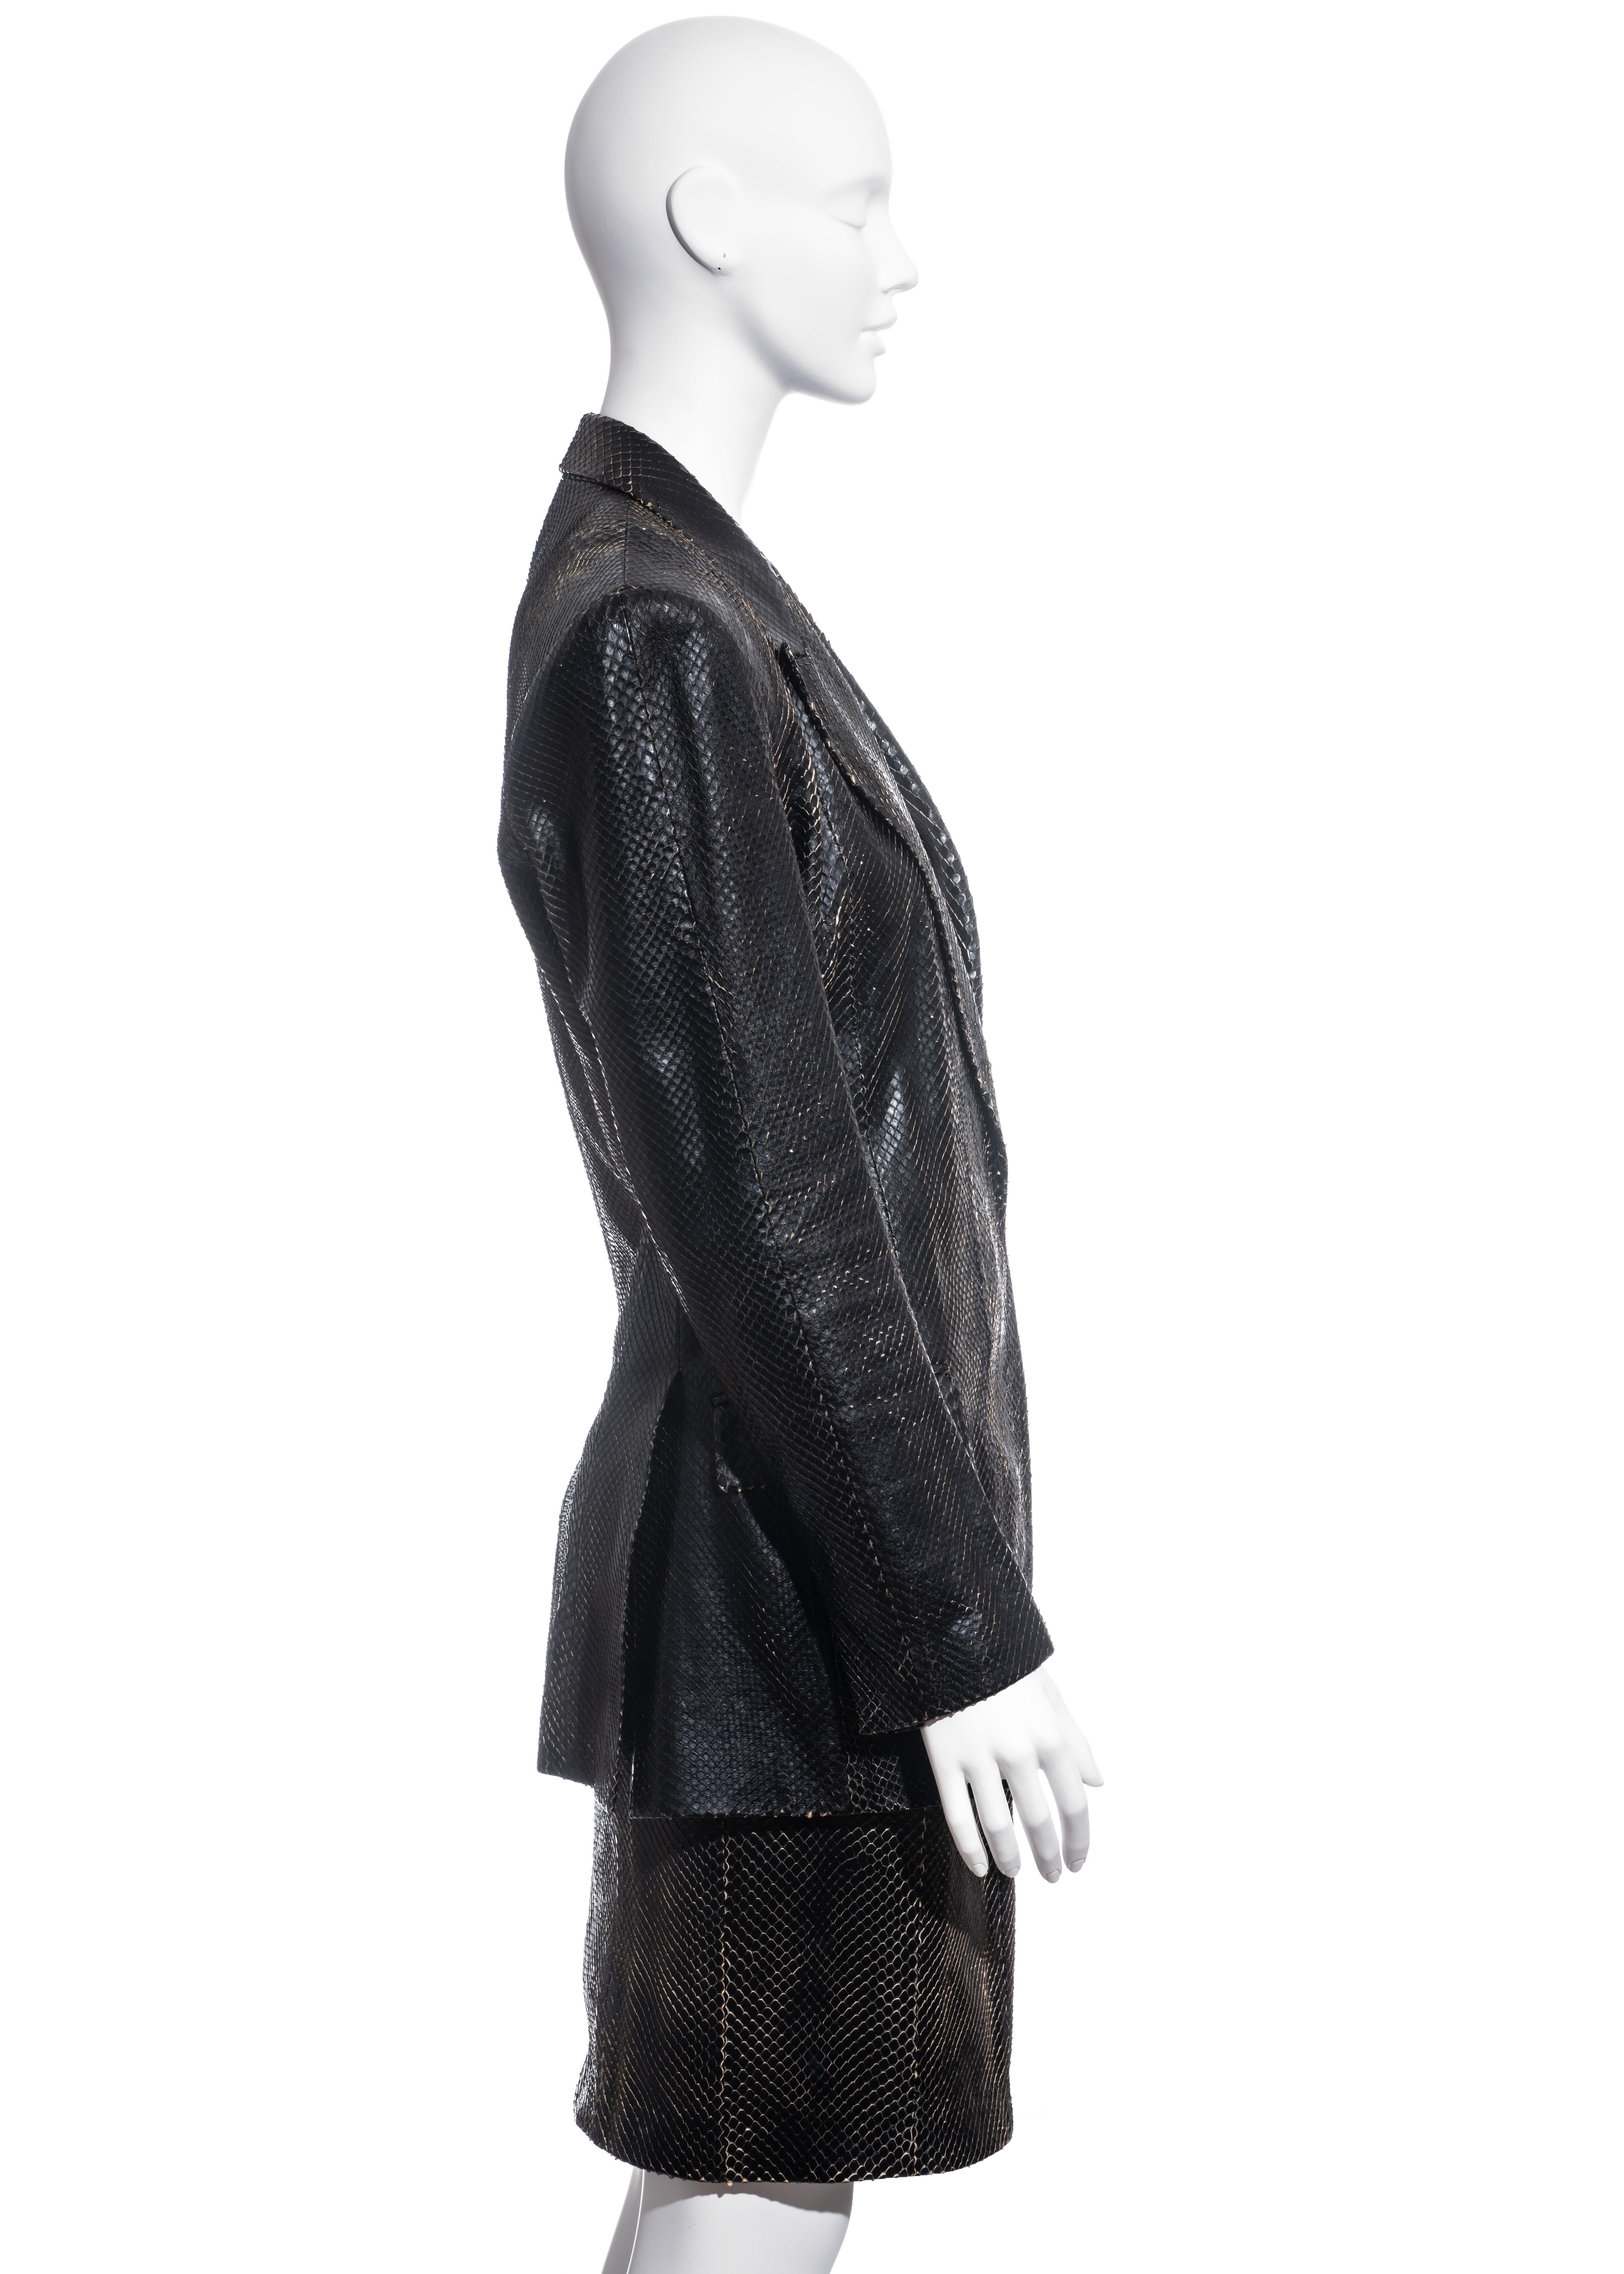 Yves Saint Laurent by Tom Ford black python blazer and skirt suit, ss 2001 2